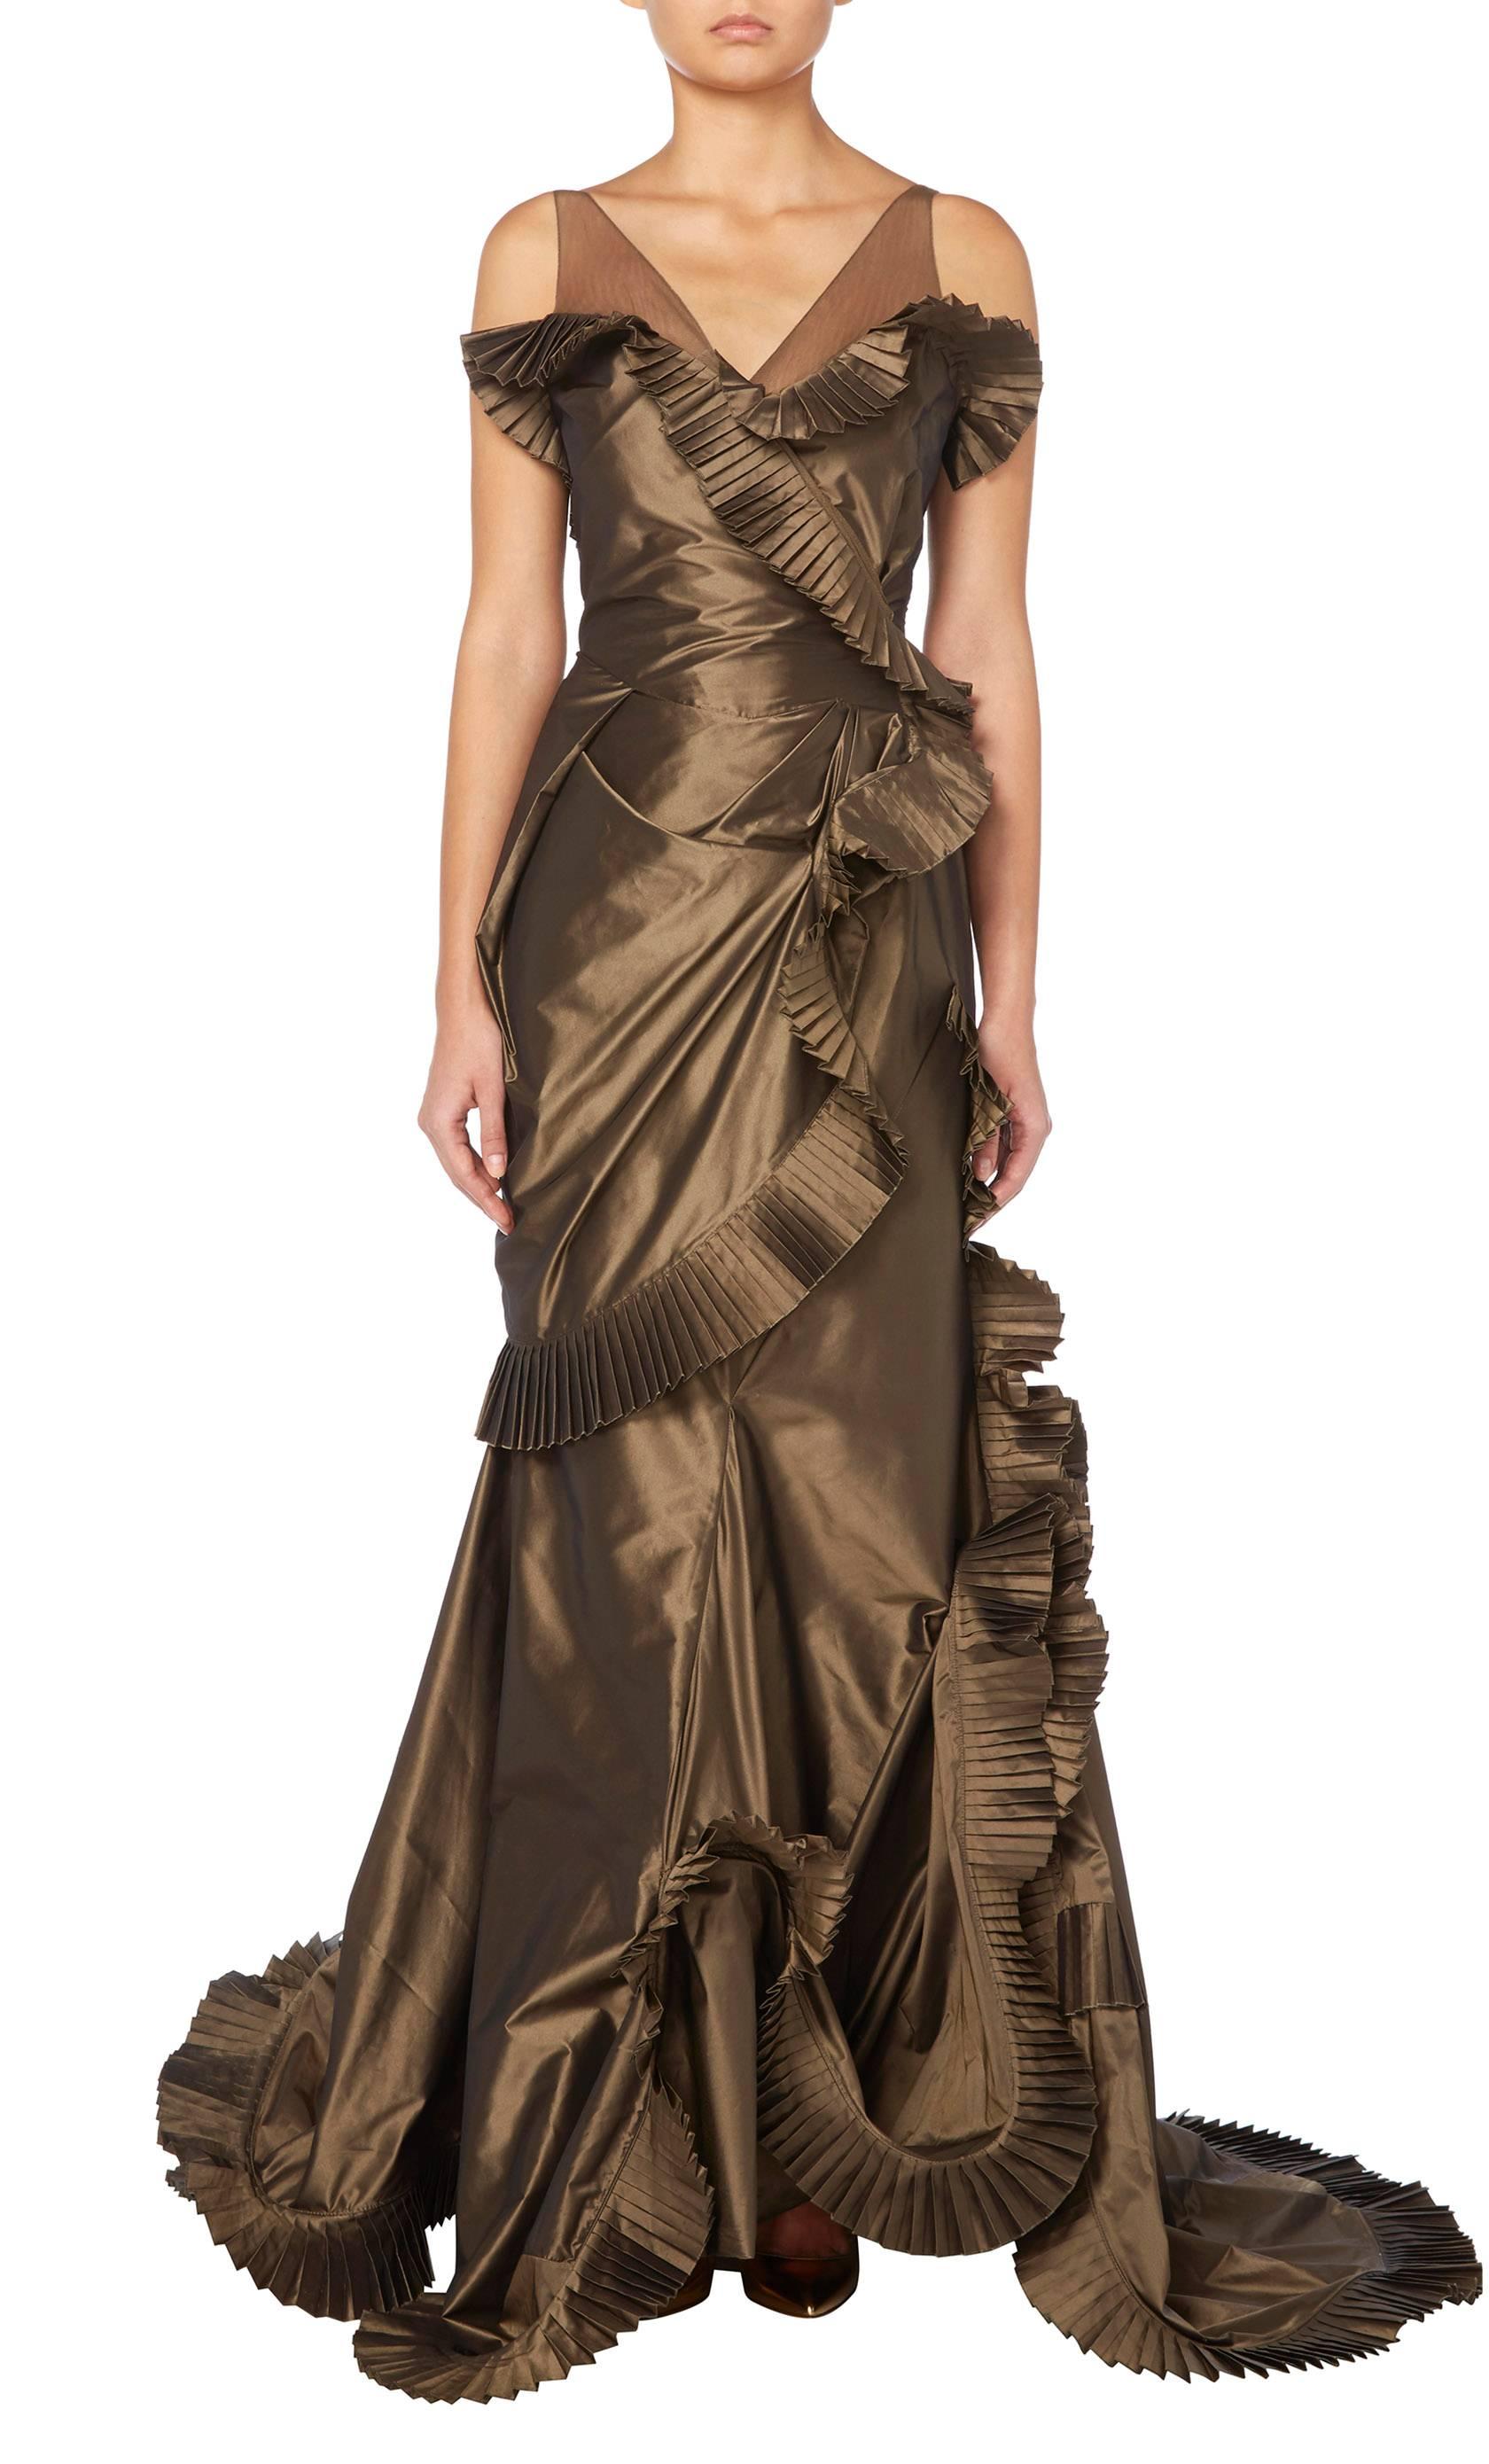 An eye-catching example of John Galliano for Christian Dior, this gown is constructed in brown silk taffeta and has a Far Eastern inspiration with its ruffled edging of micro-pleated silk taffeta and shoulder straps of bronze silk tulle.